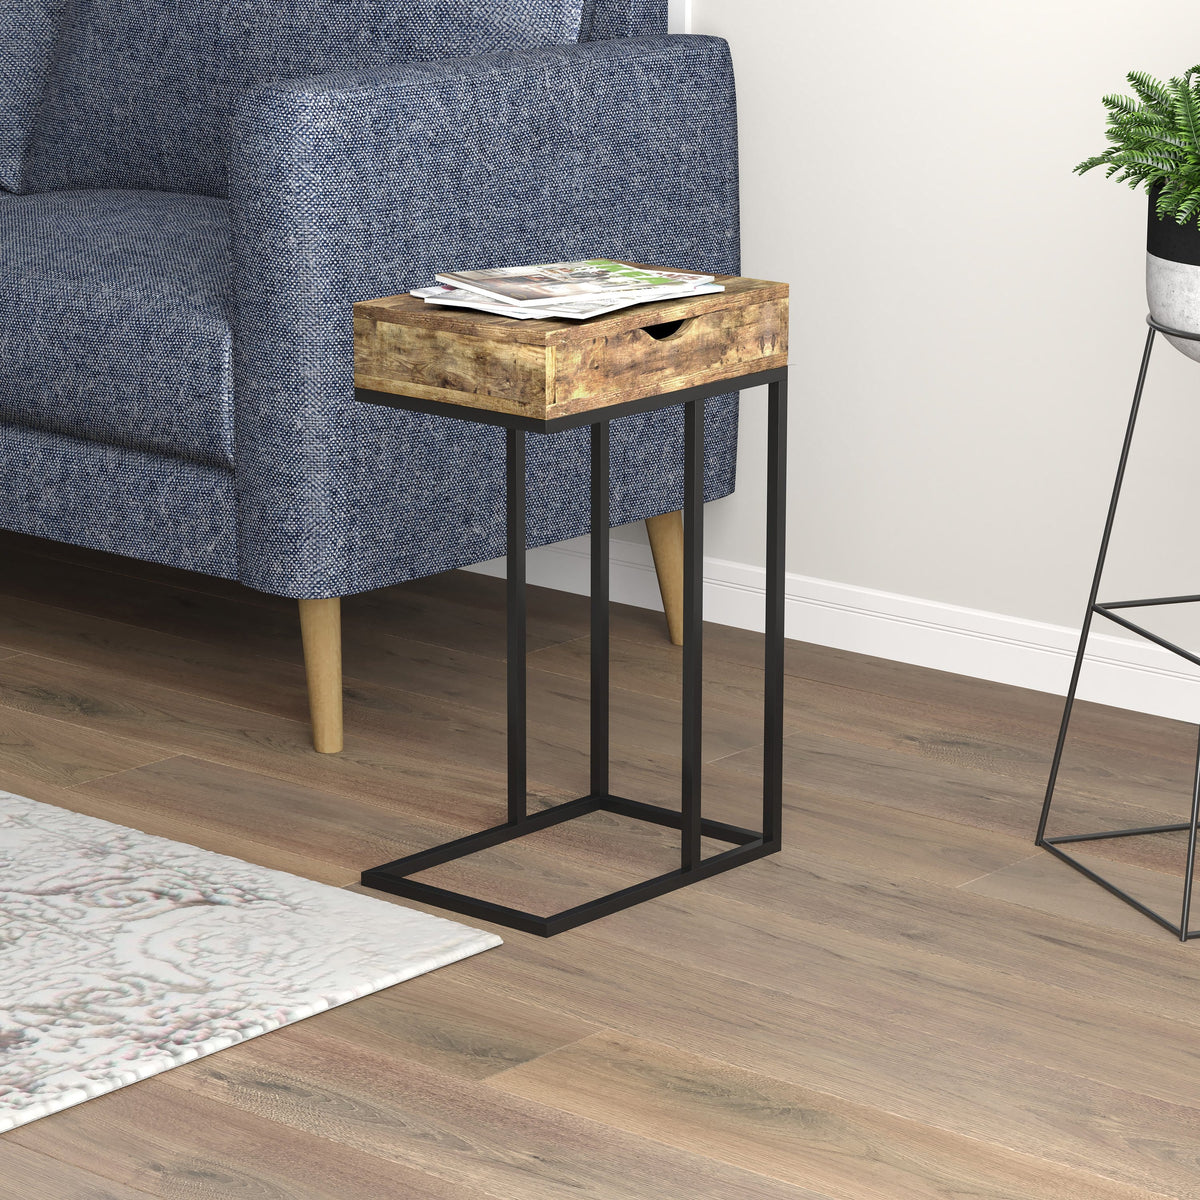 C-Shaped Dark Taupe and Black Metal Accent Table with 1 Drawer